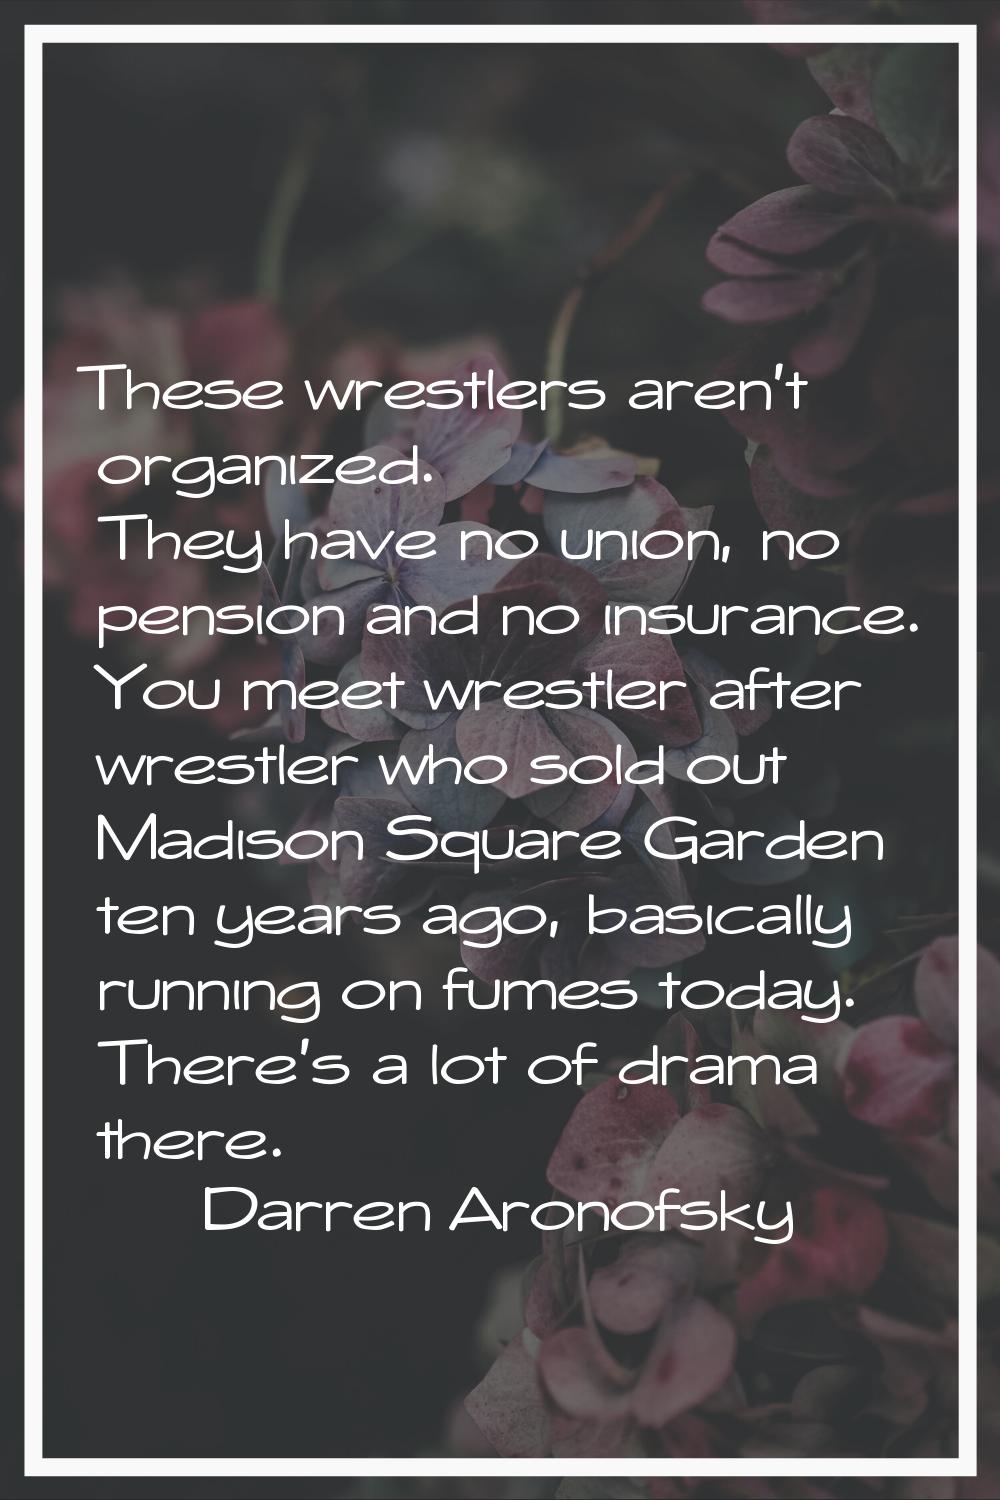 These wrestlers aren't organized. They have no union, no pension and no insurance. You meet wrestle